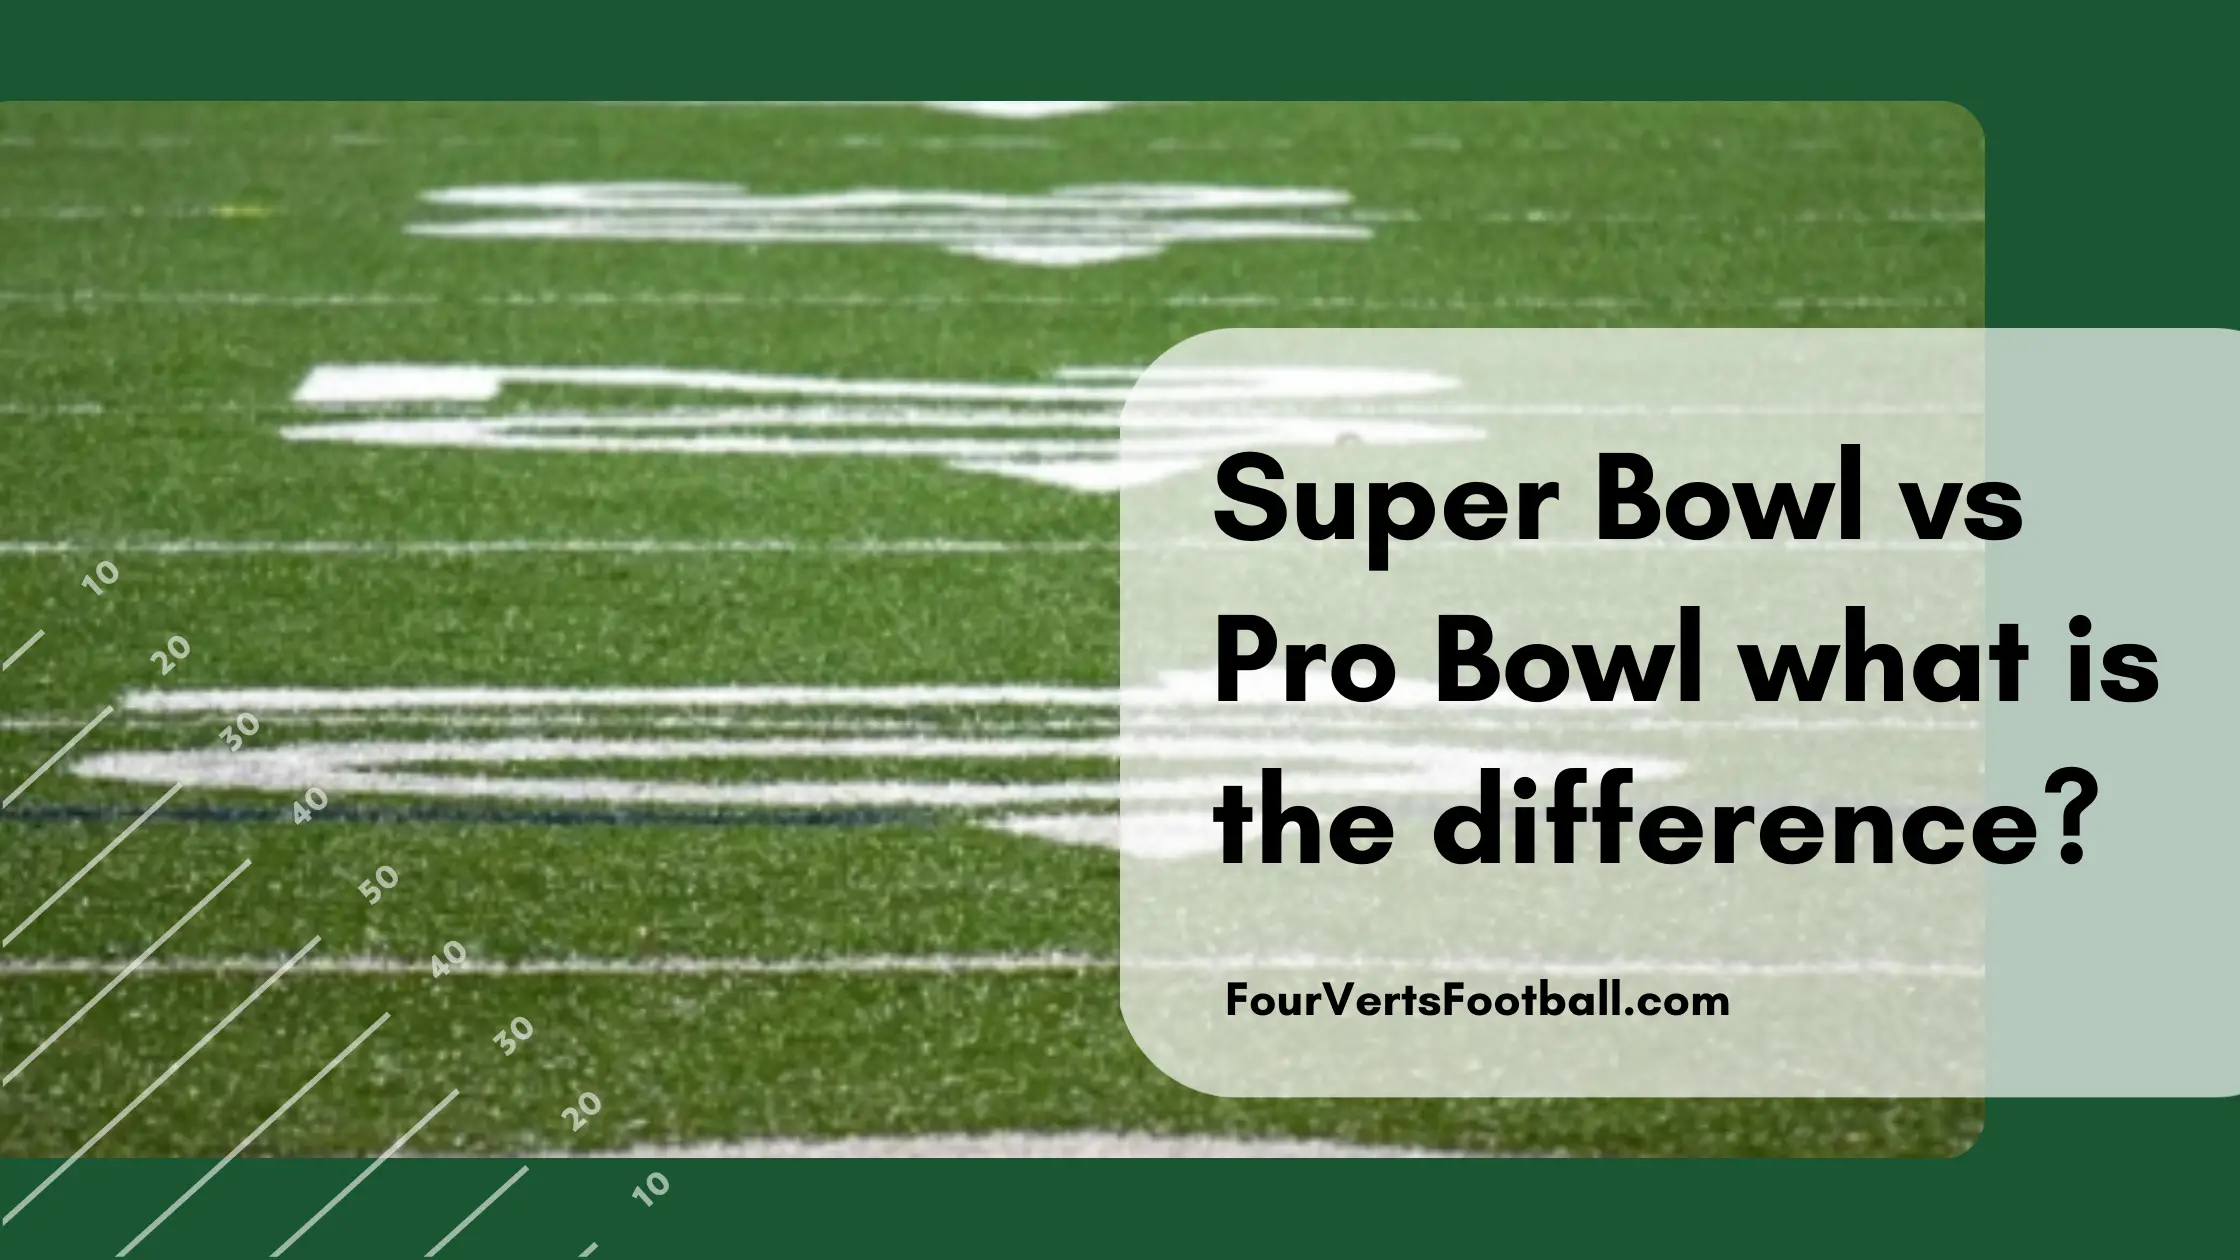 Super Bowl Vs Pro Bowl What Is the Difference?